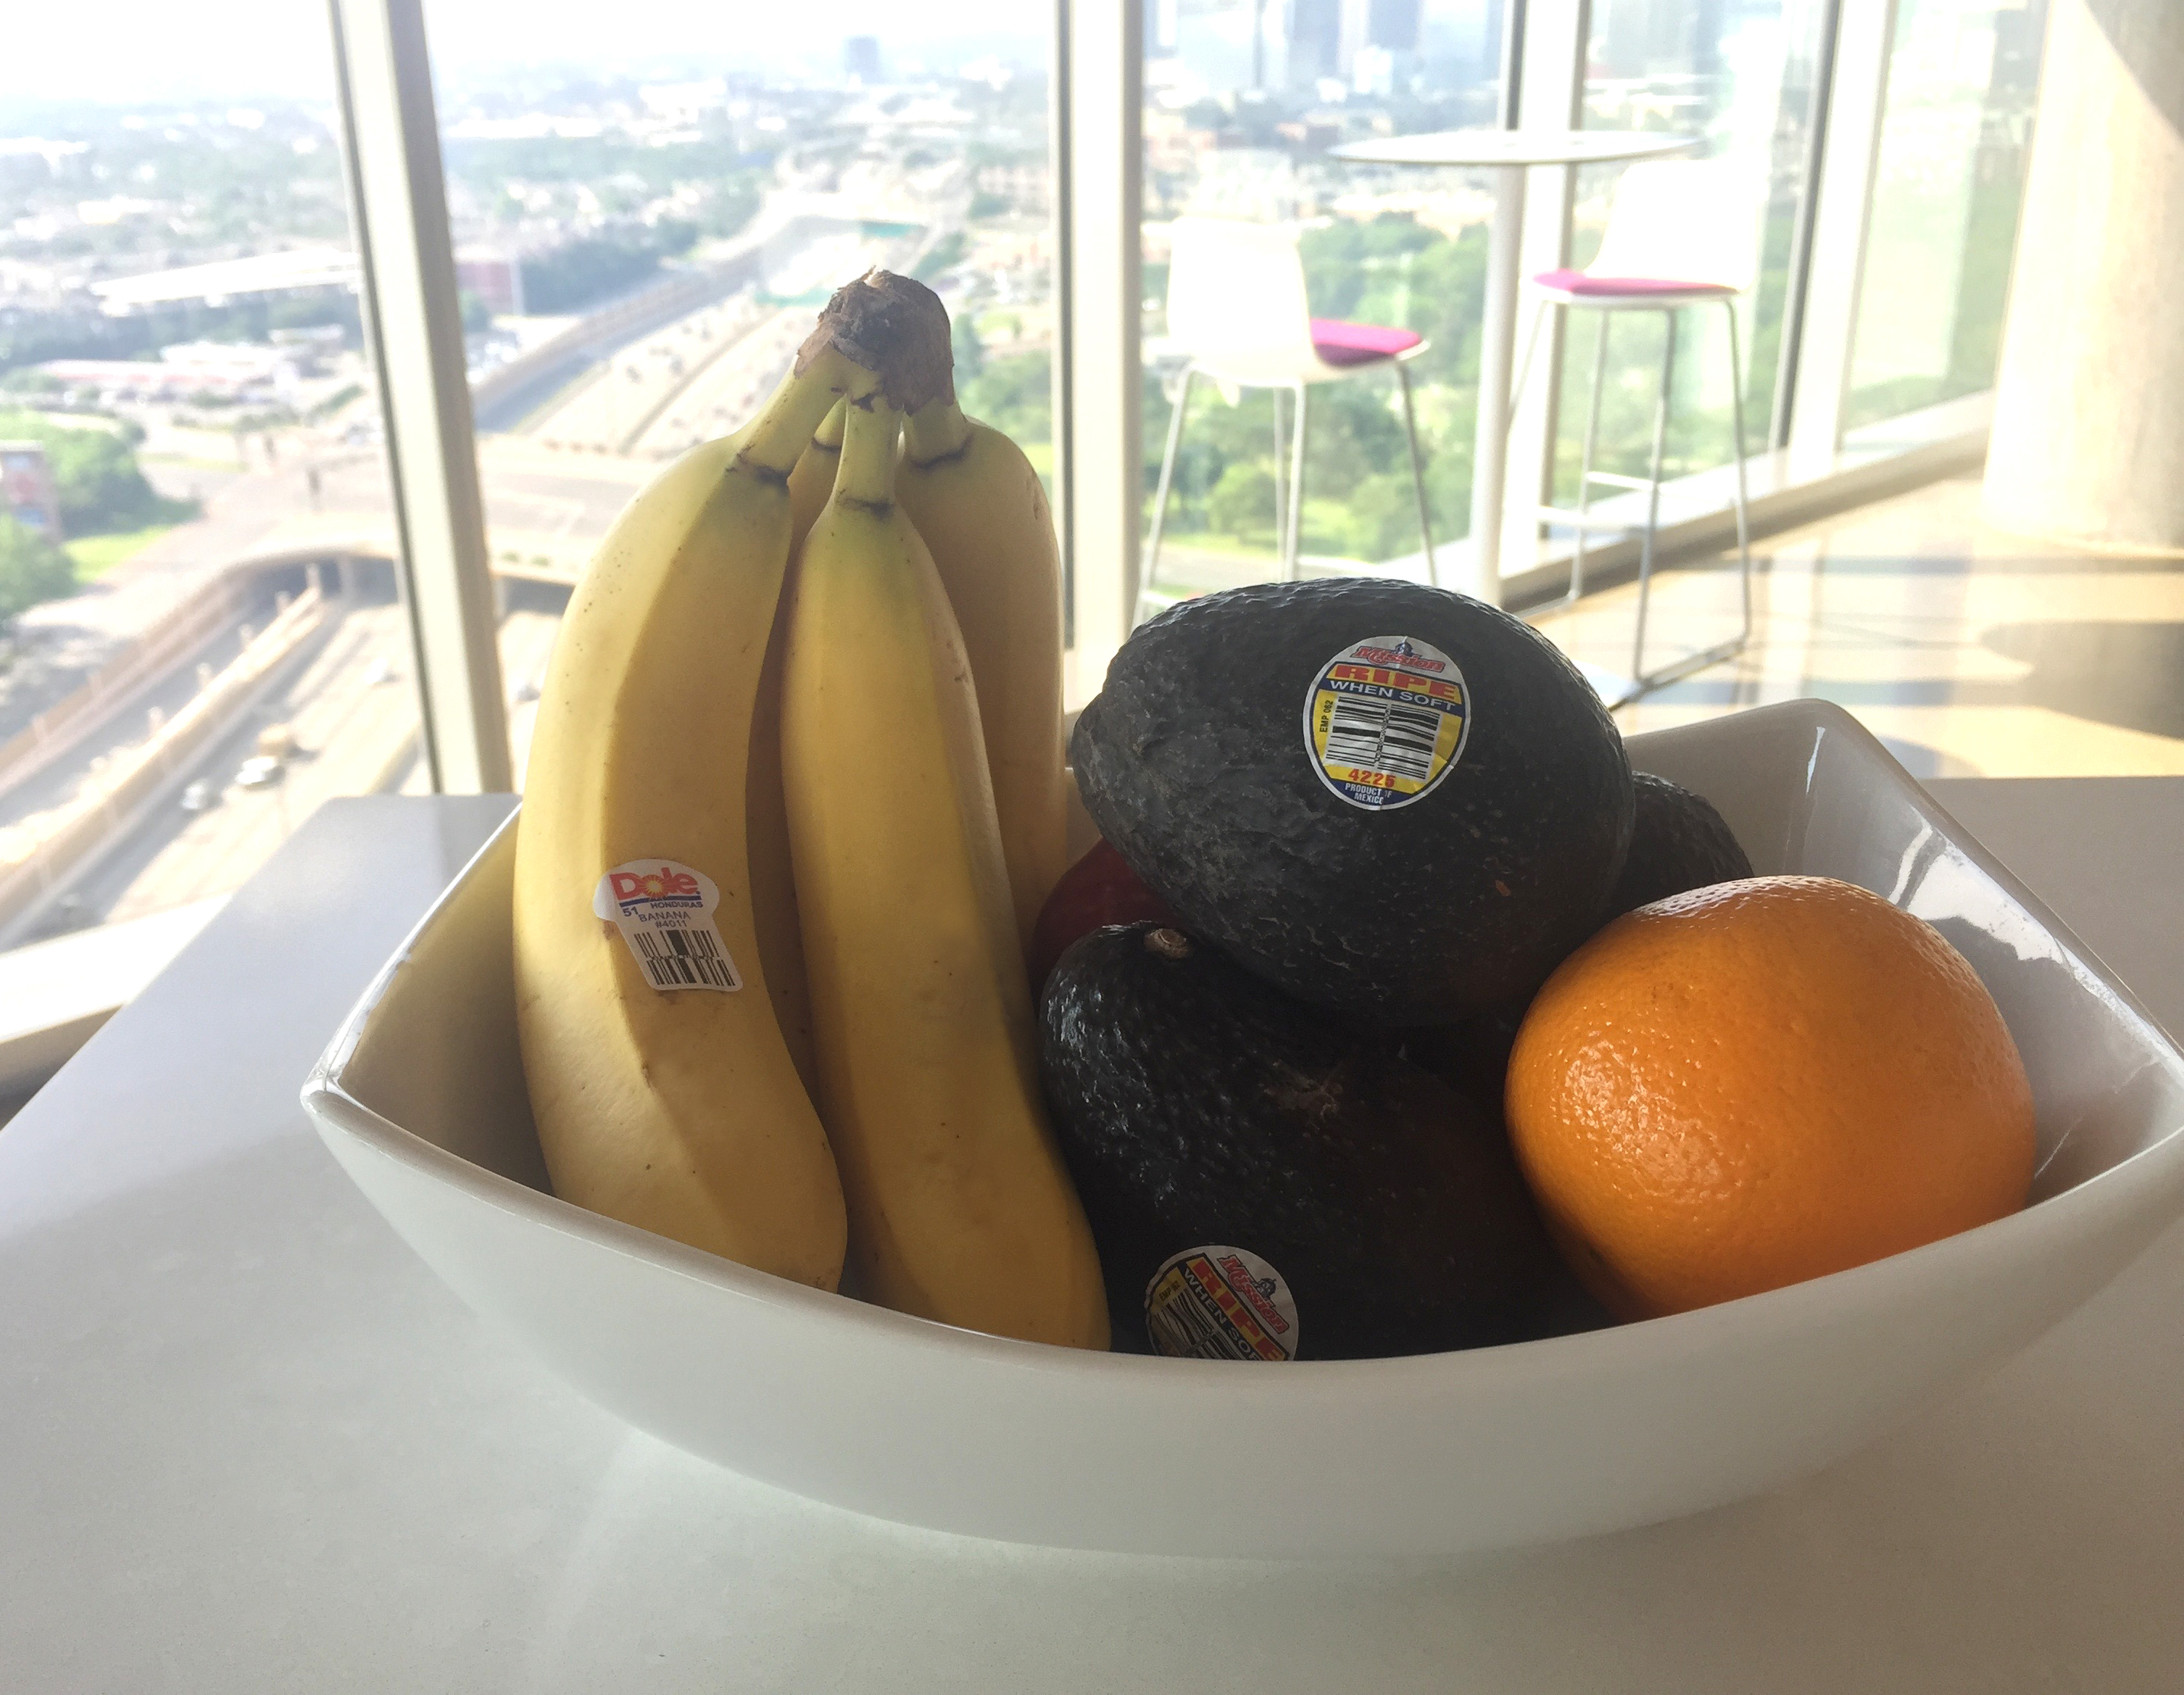 Photo of a bowl of fruit containing bananas, avocados, and an orange with a highway scene in the background.